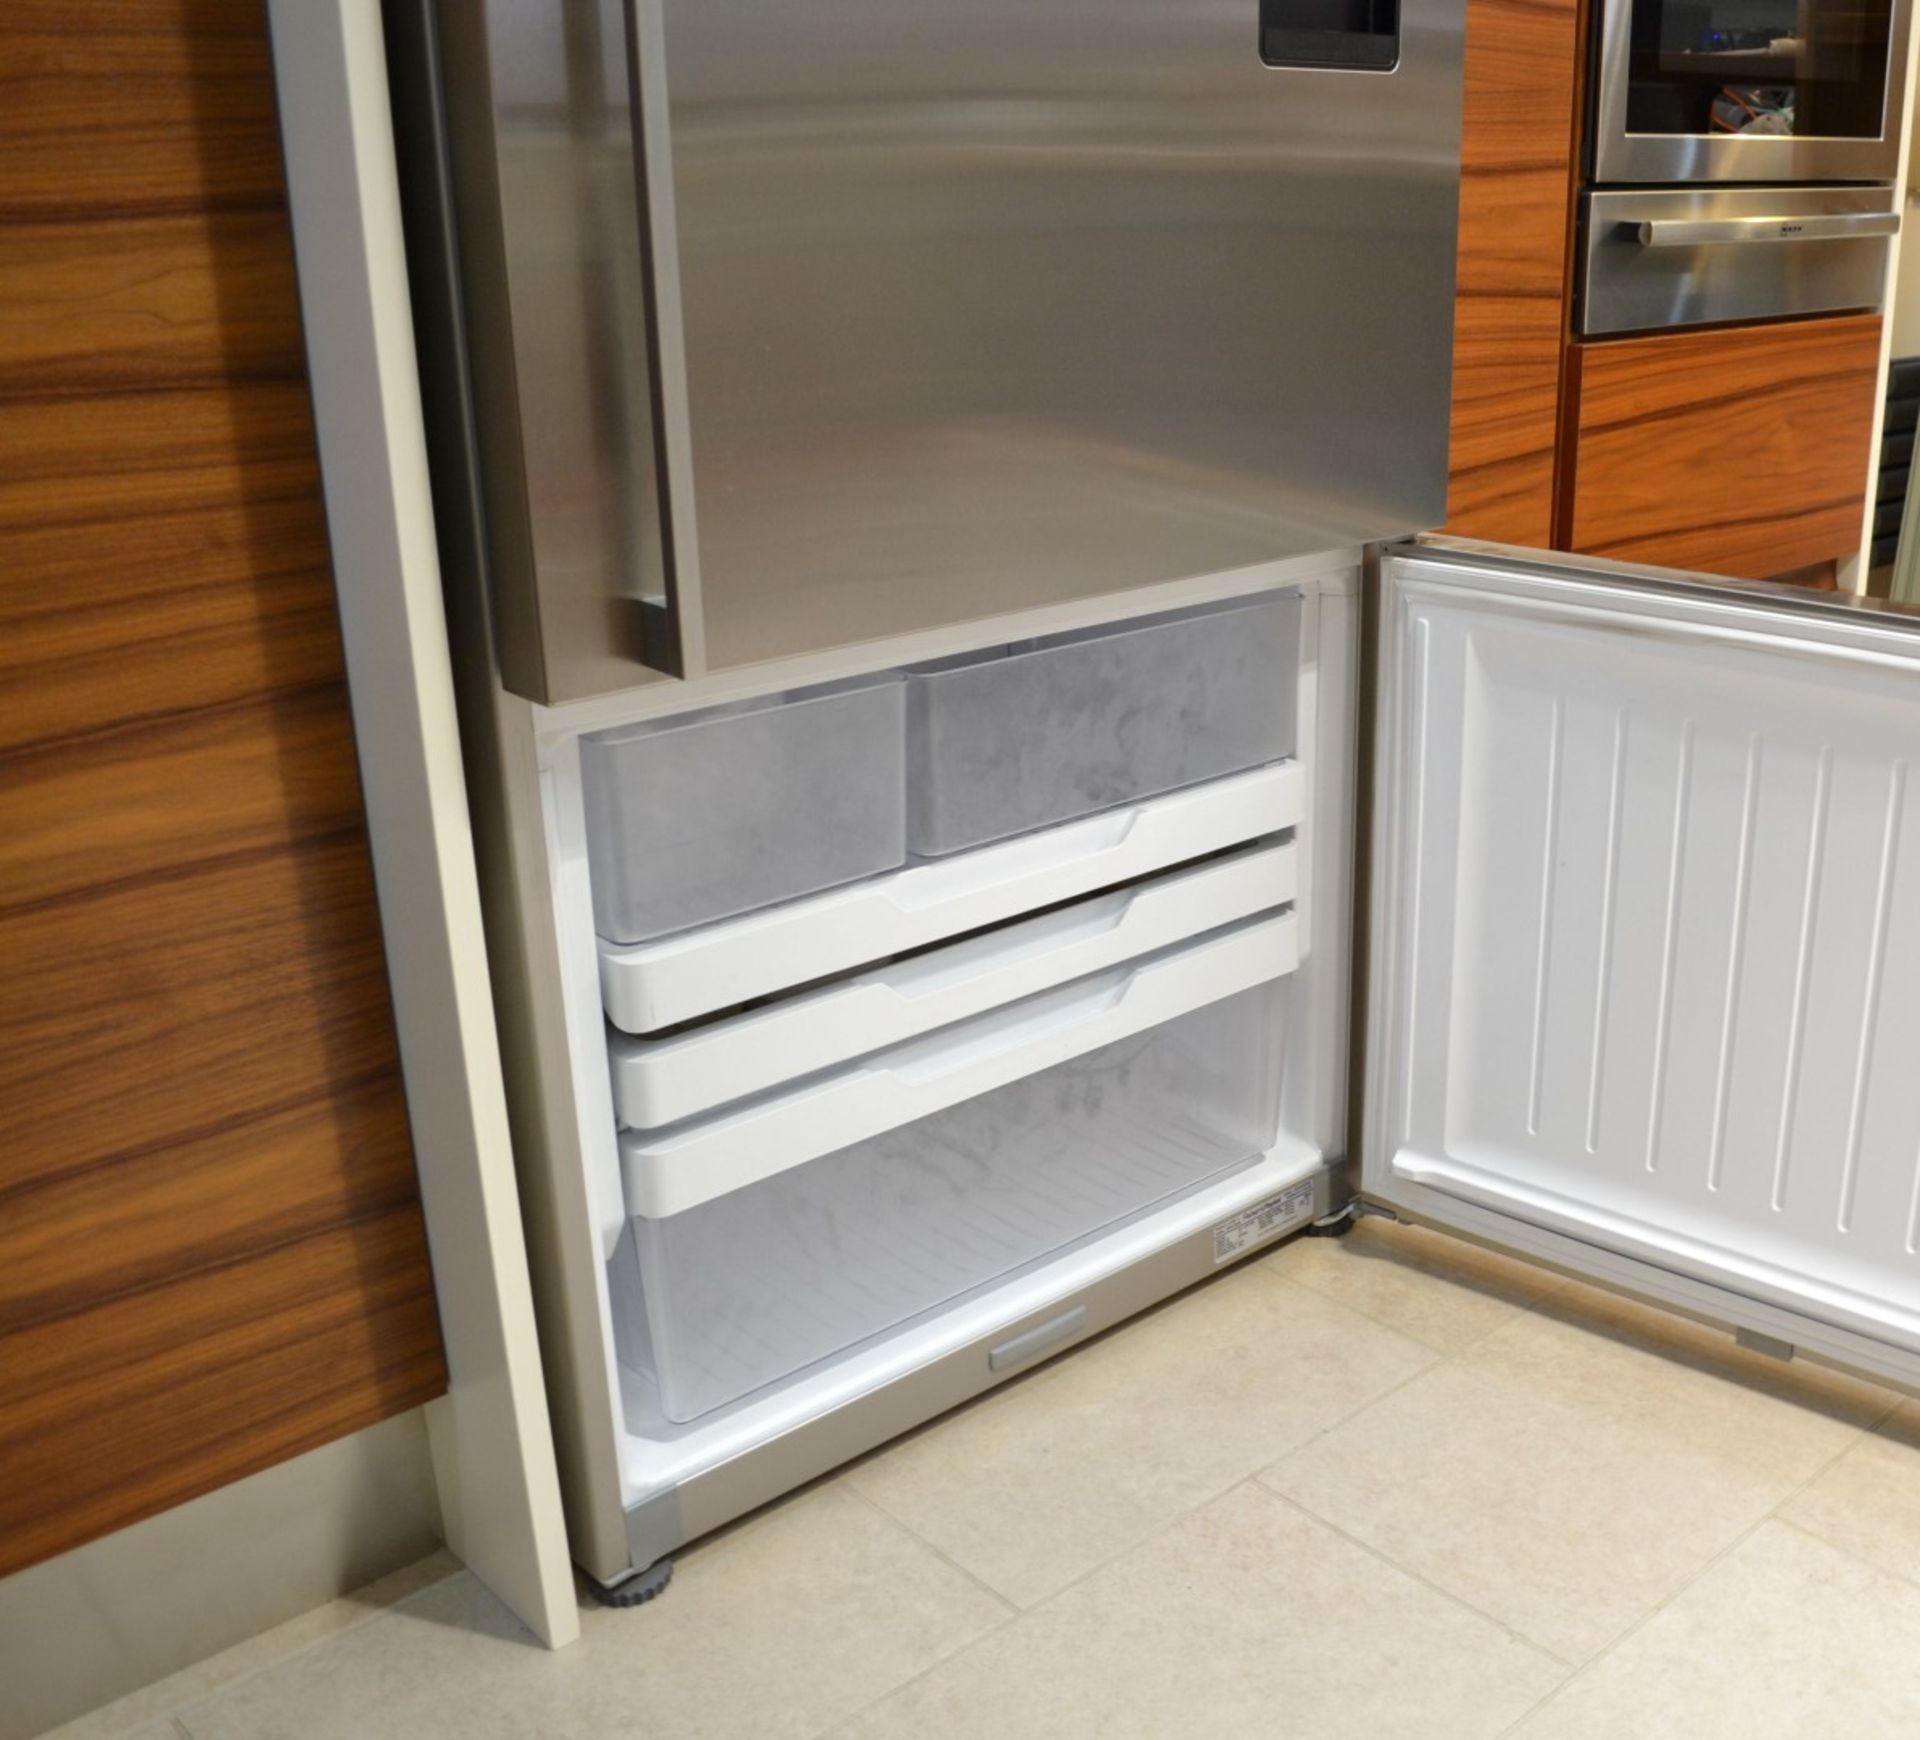 1 x Fisher & Paykel Stainless Steel 790mm 469 Litre Fridge Freezer from Showroom Display Kitchen - - Image 11 of 17